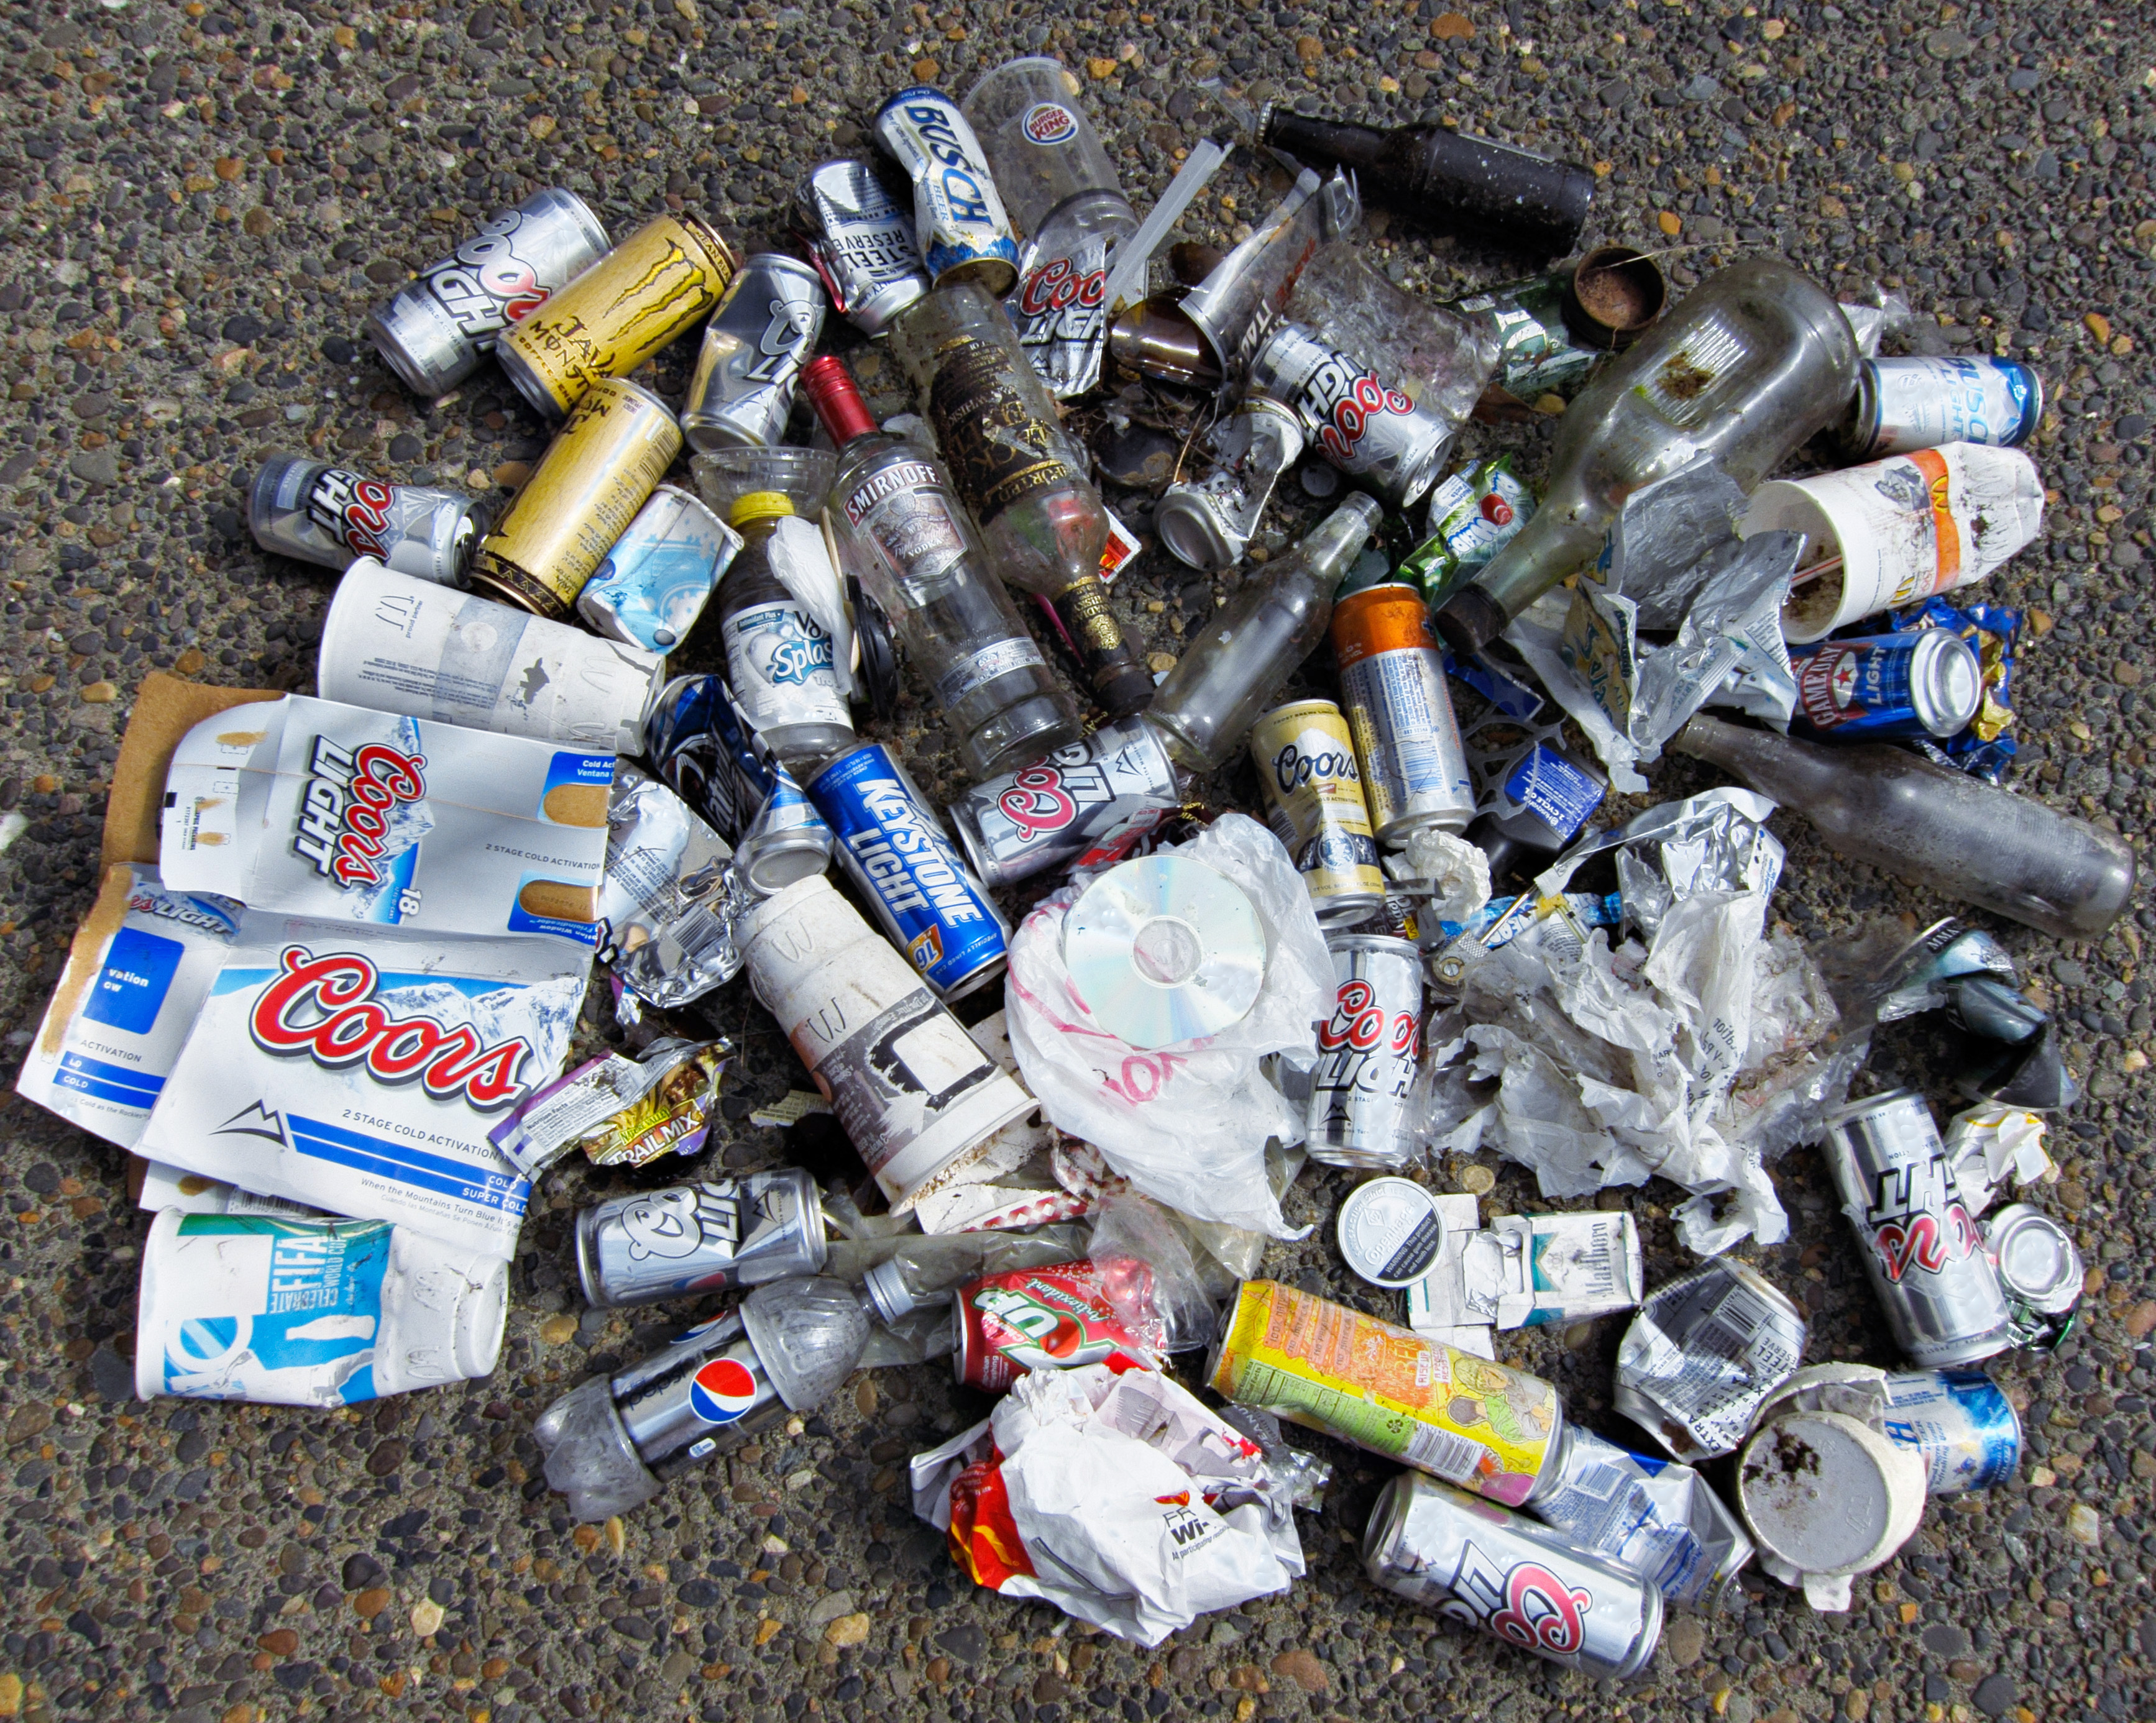 Roadside Trash: Causes and Solutions